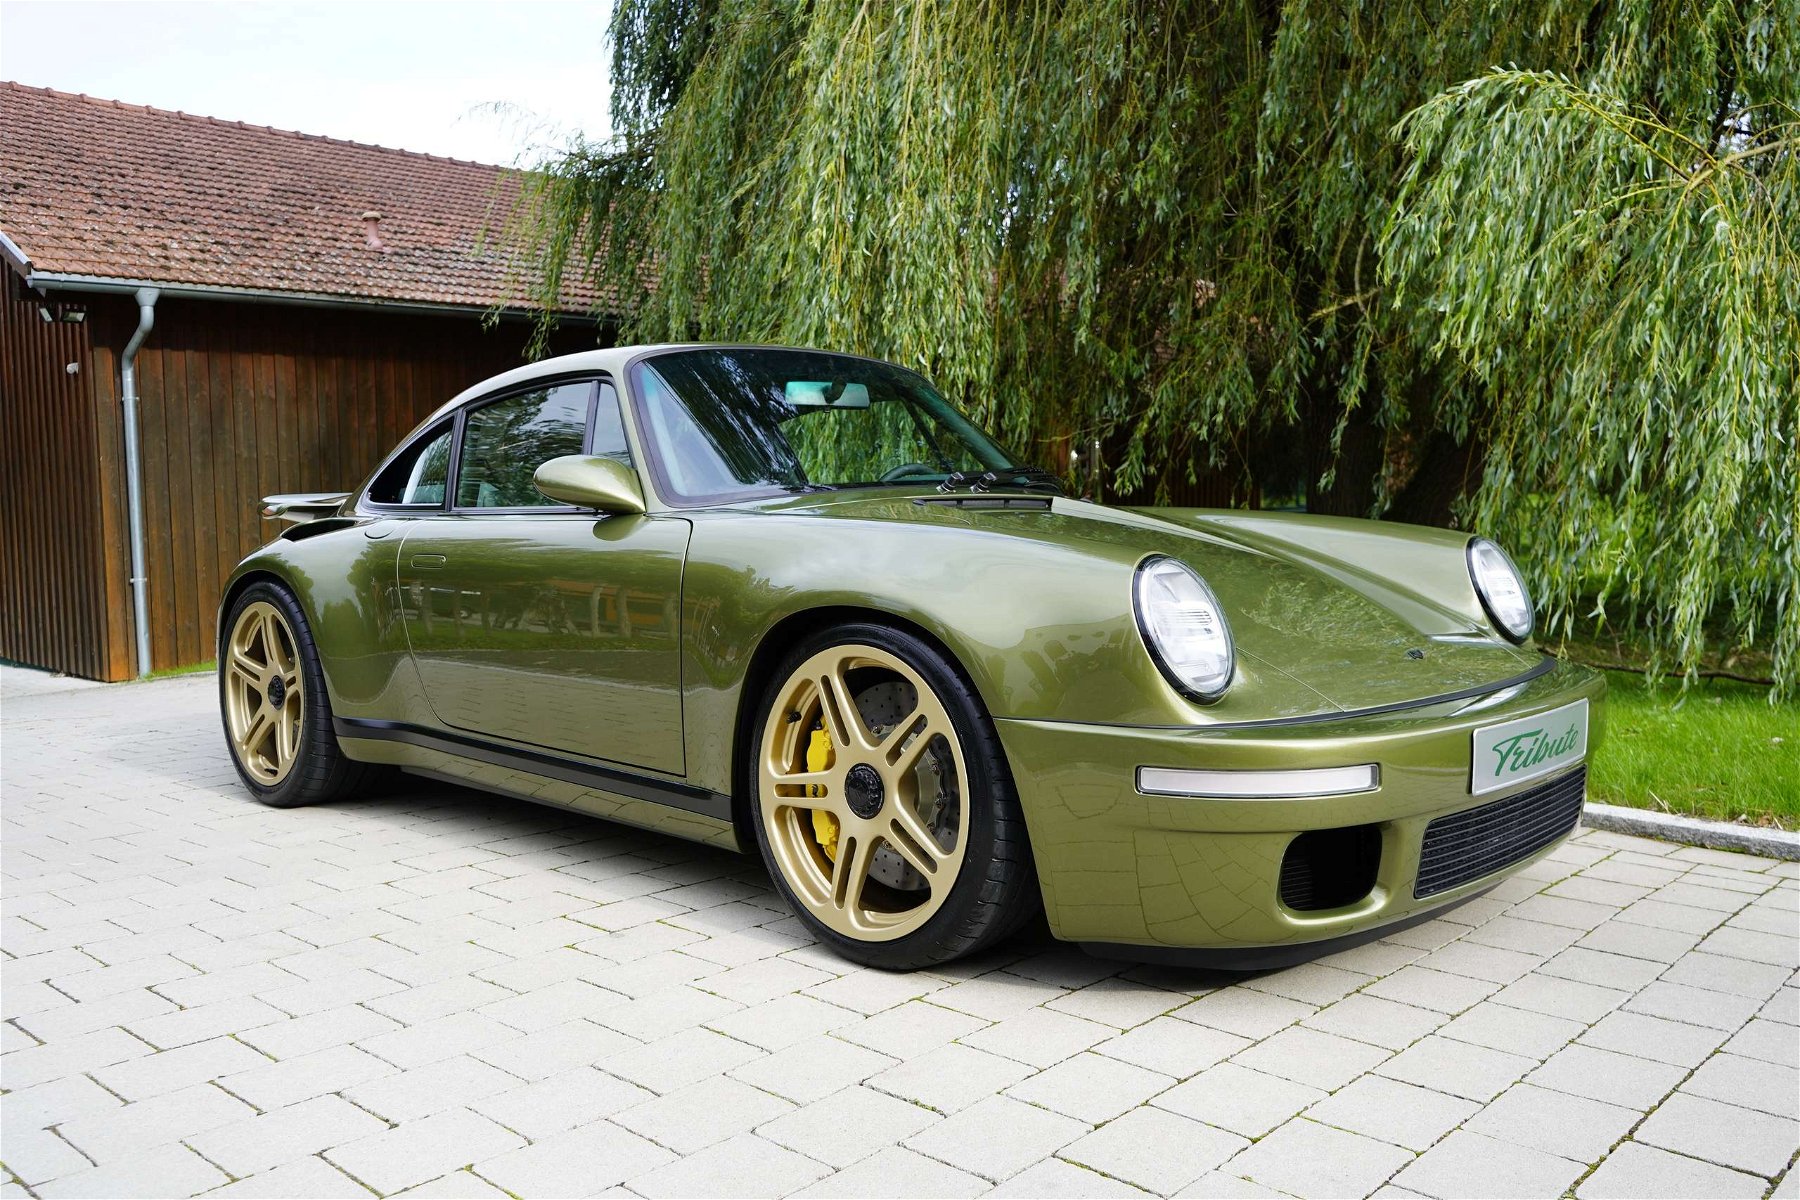 RUF Tribute front quarter view